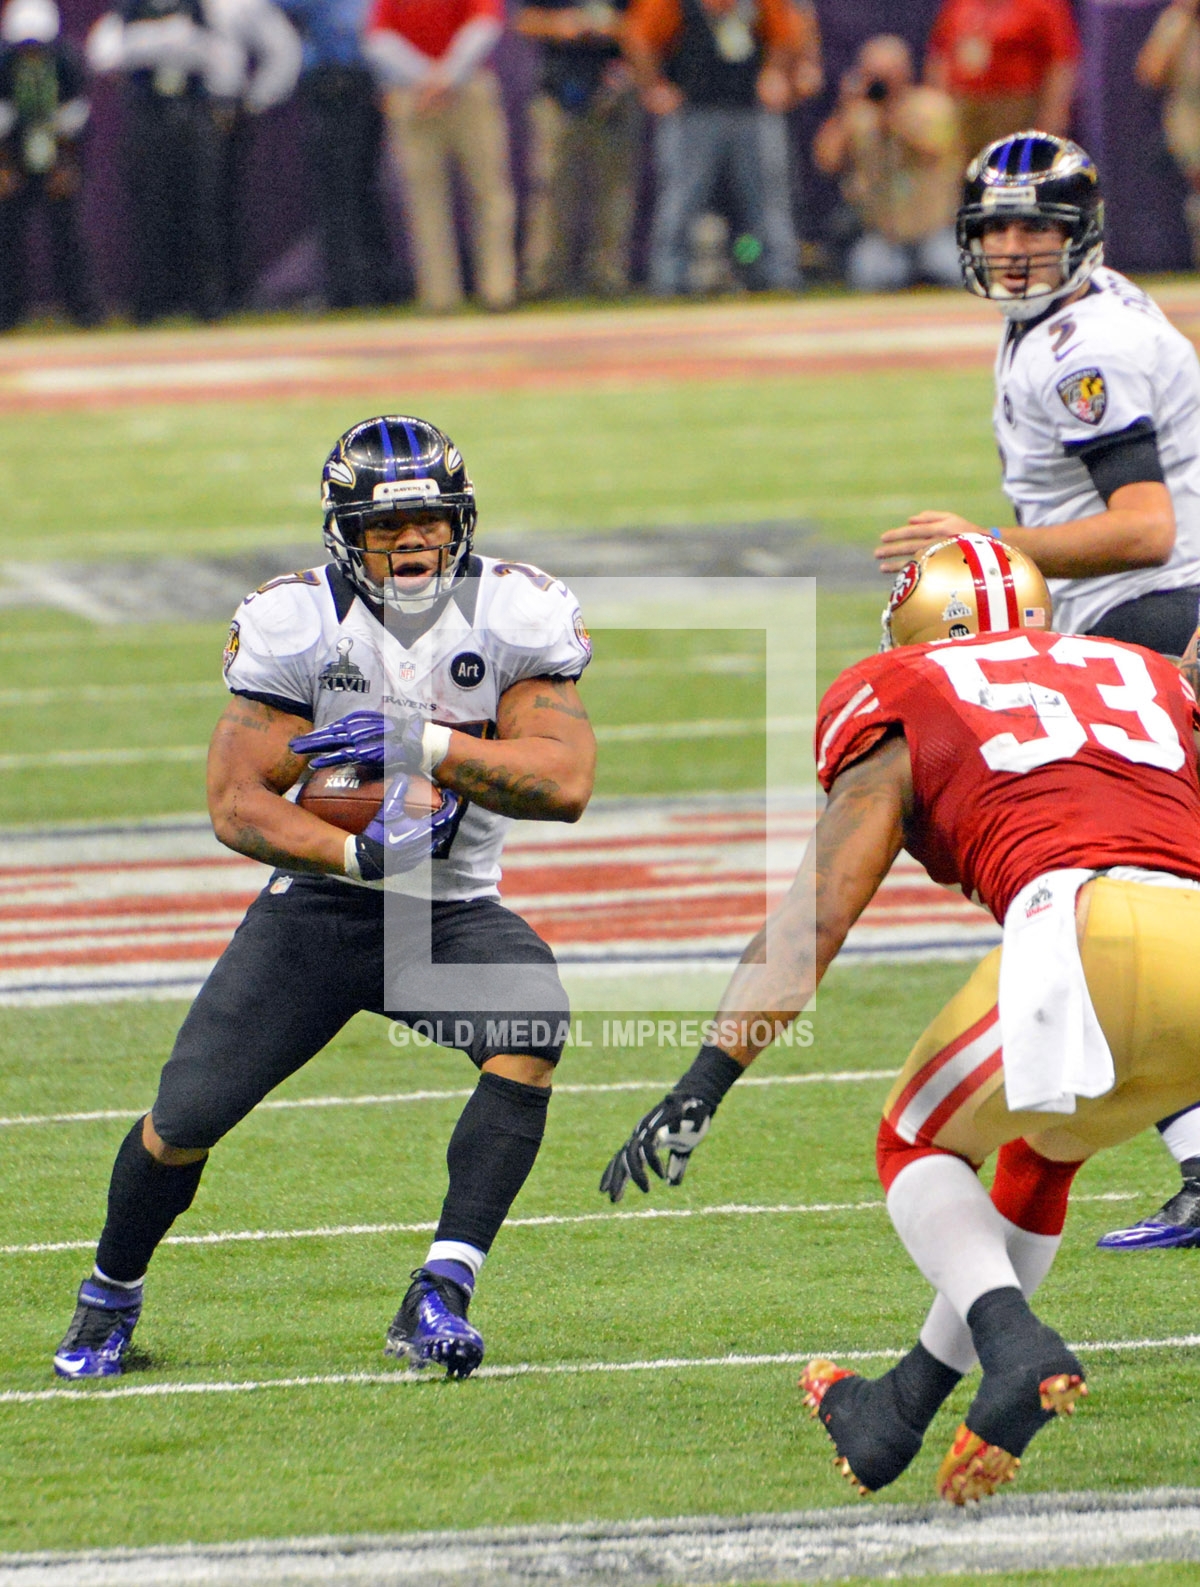 Baltimore Ravens running back Ray Rice runs for a first down in the fourth quarter as San Francisco 49ers linebacker Navorro Bowman comes up to make the tackle.